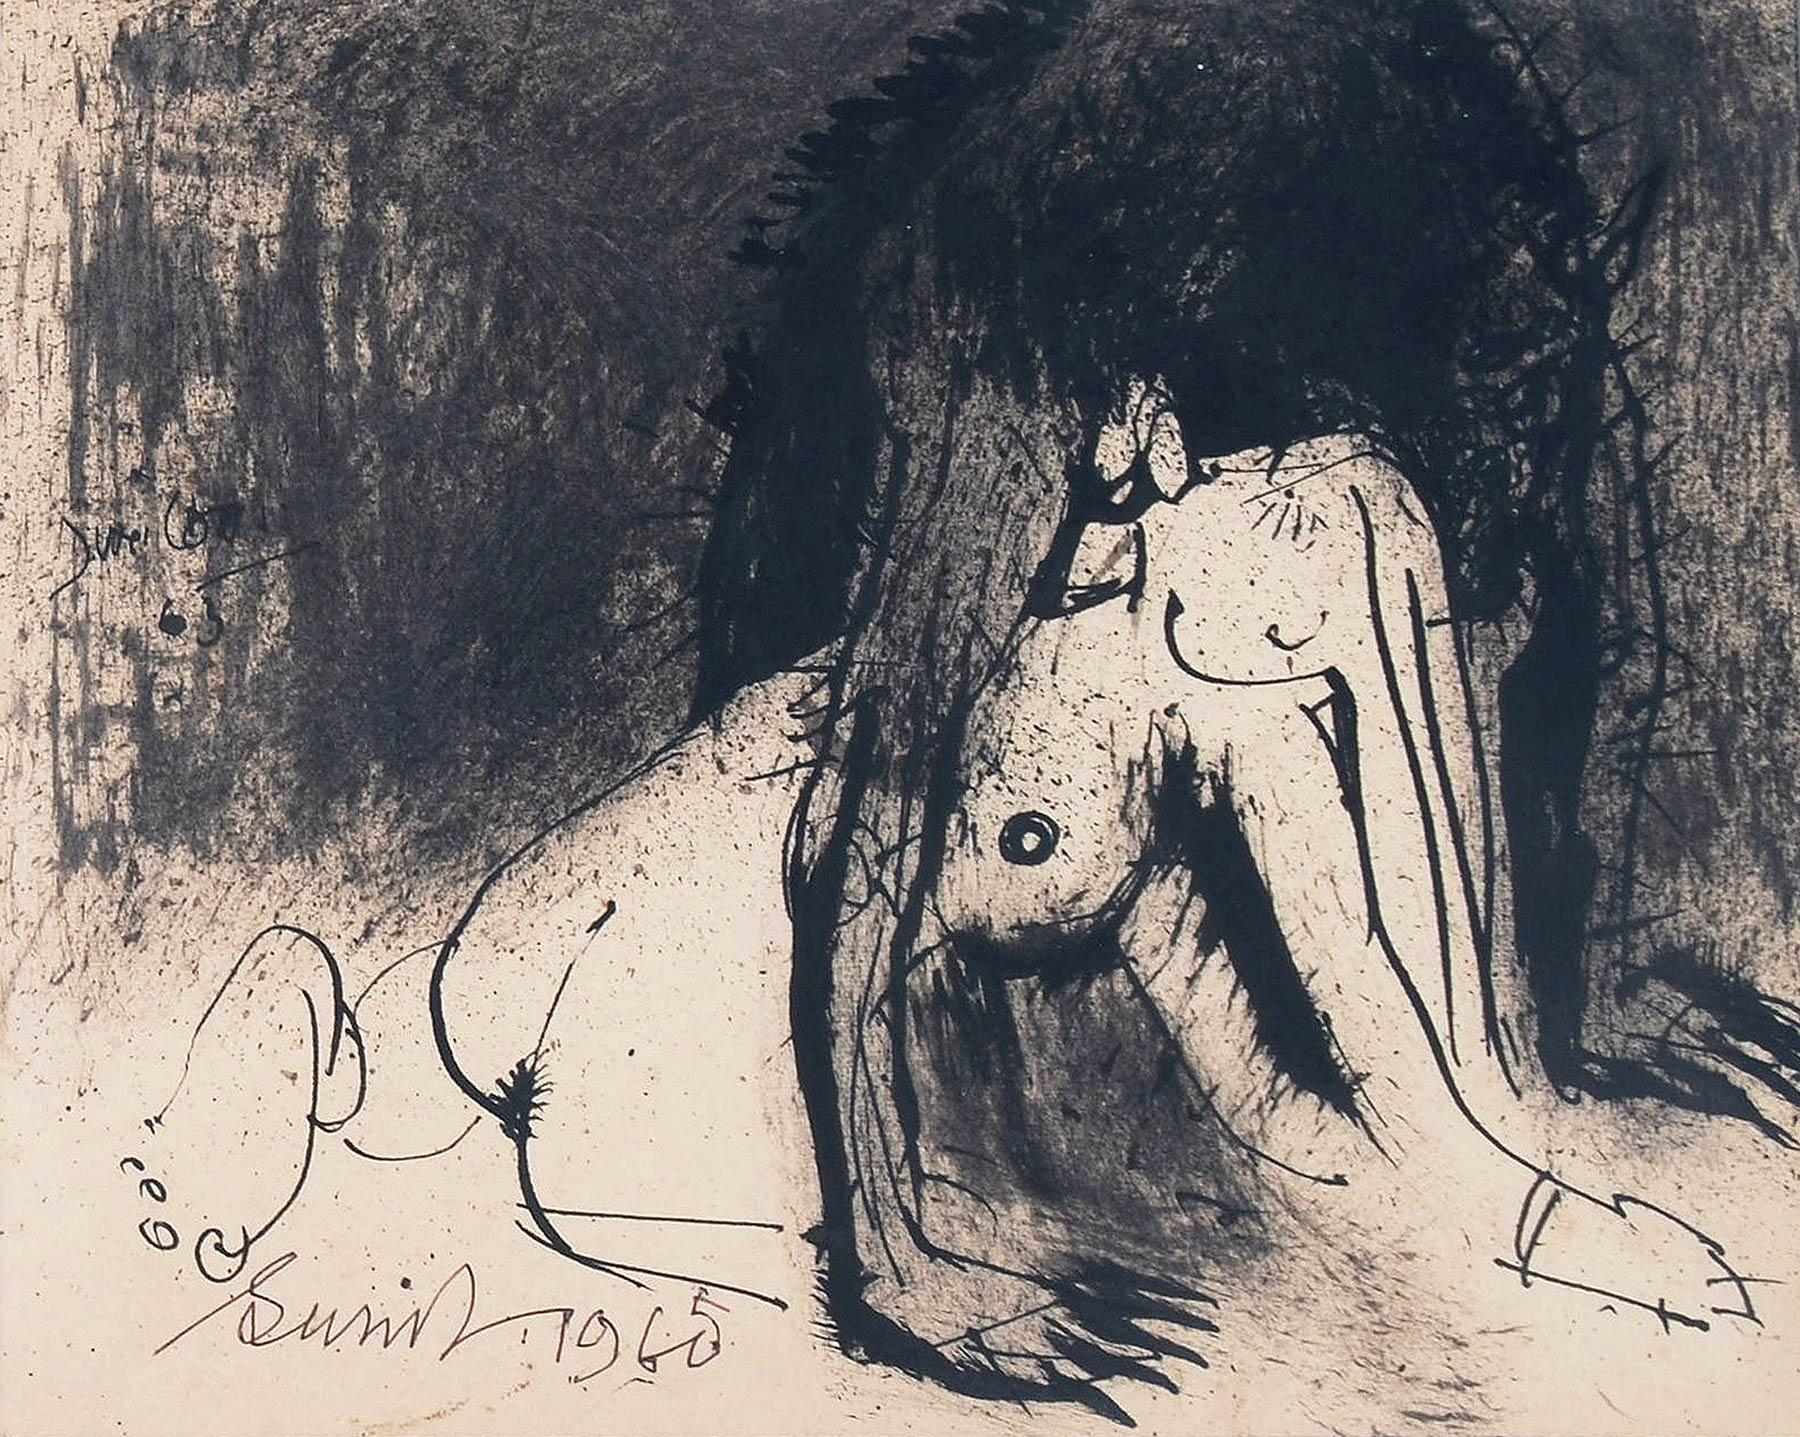 Nude, Ink & Charcoal on Paper, by Indian Artist Sunil Das "In Stock"